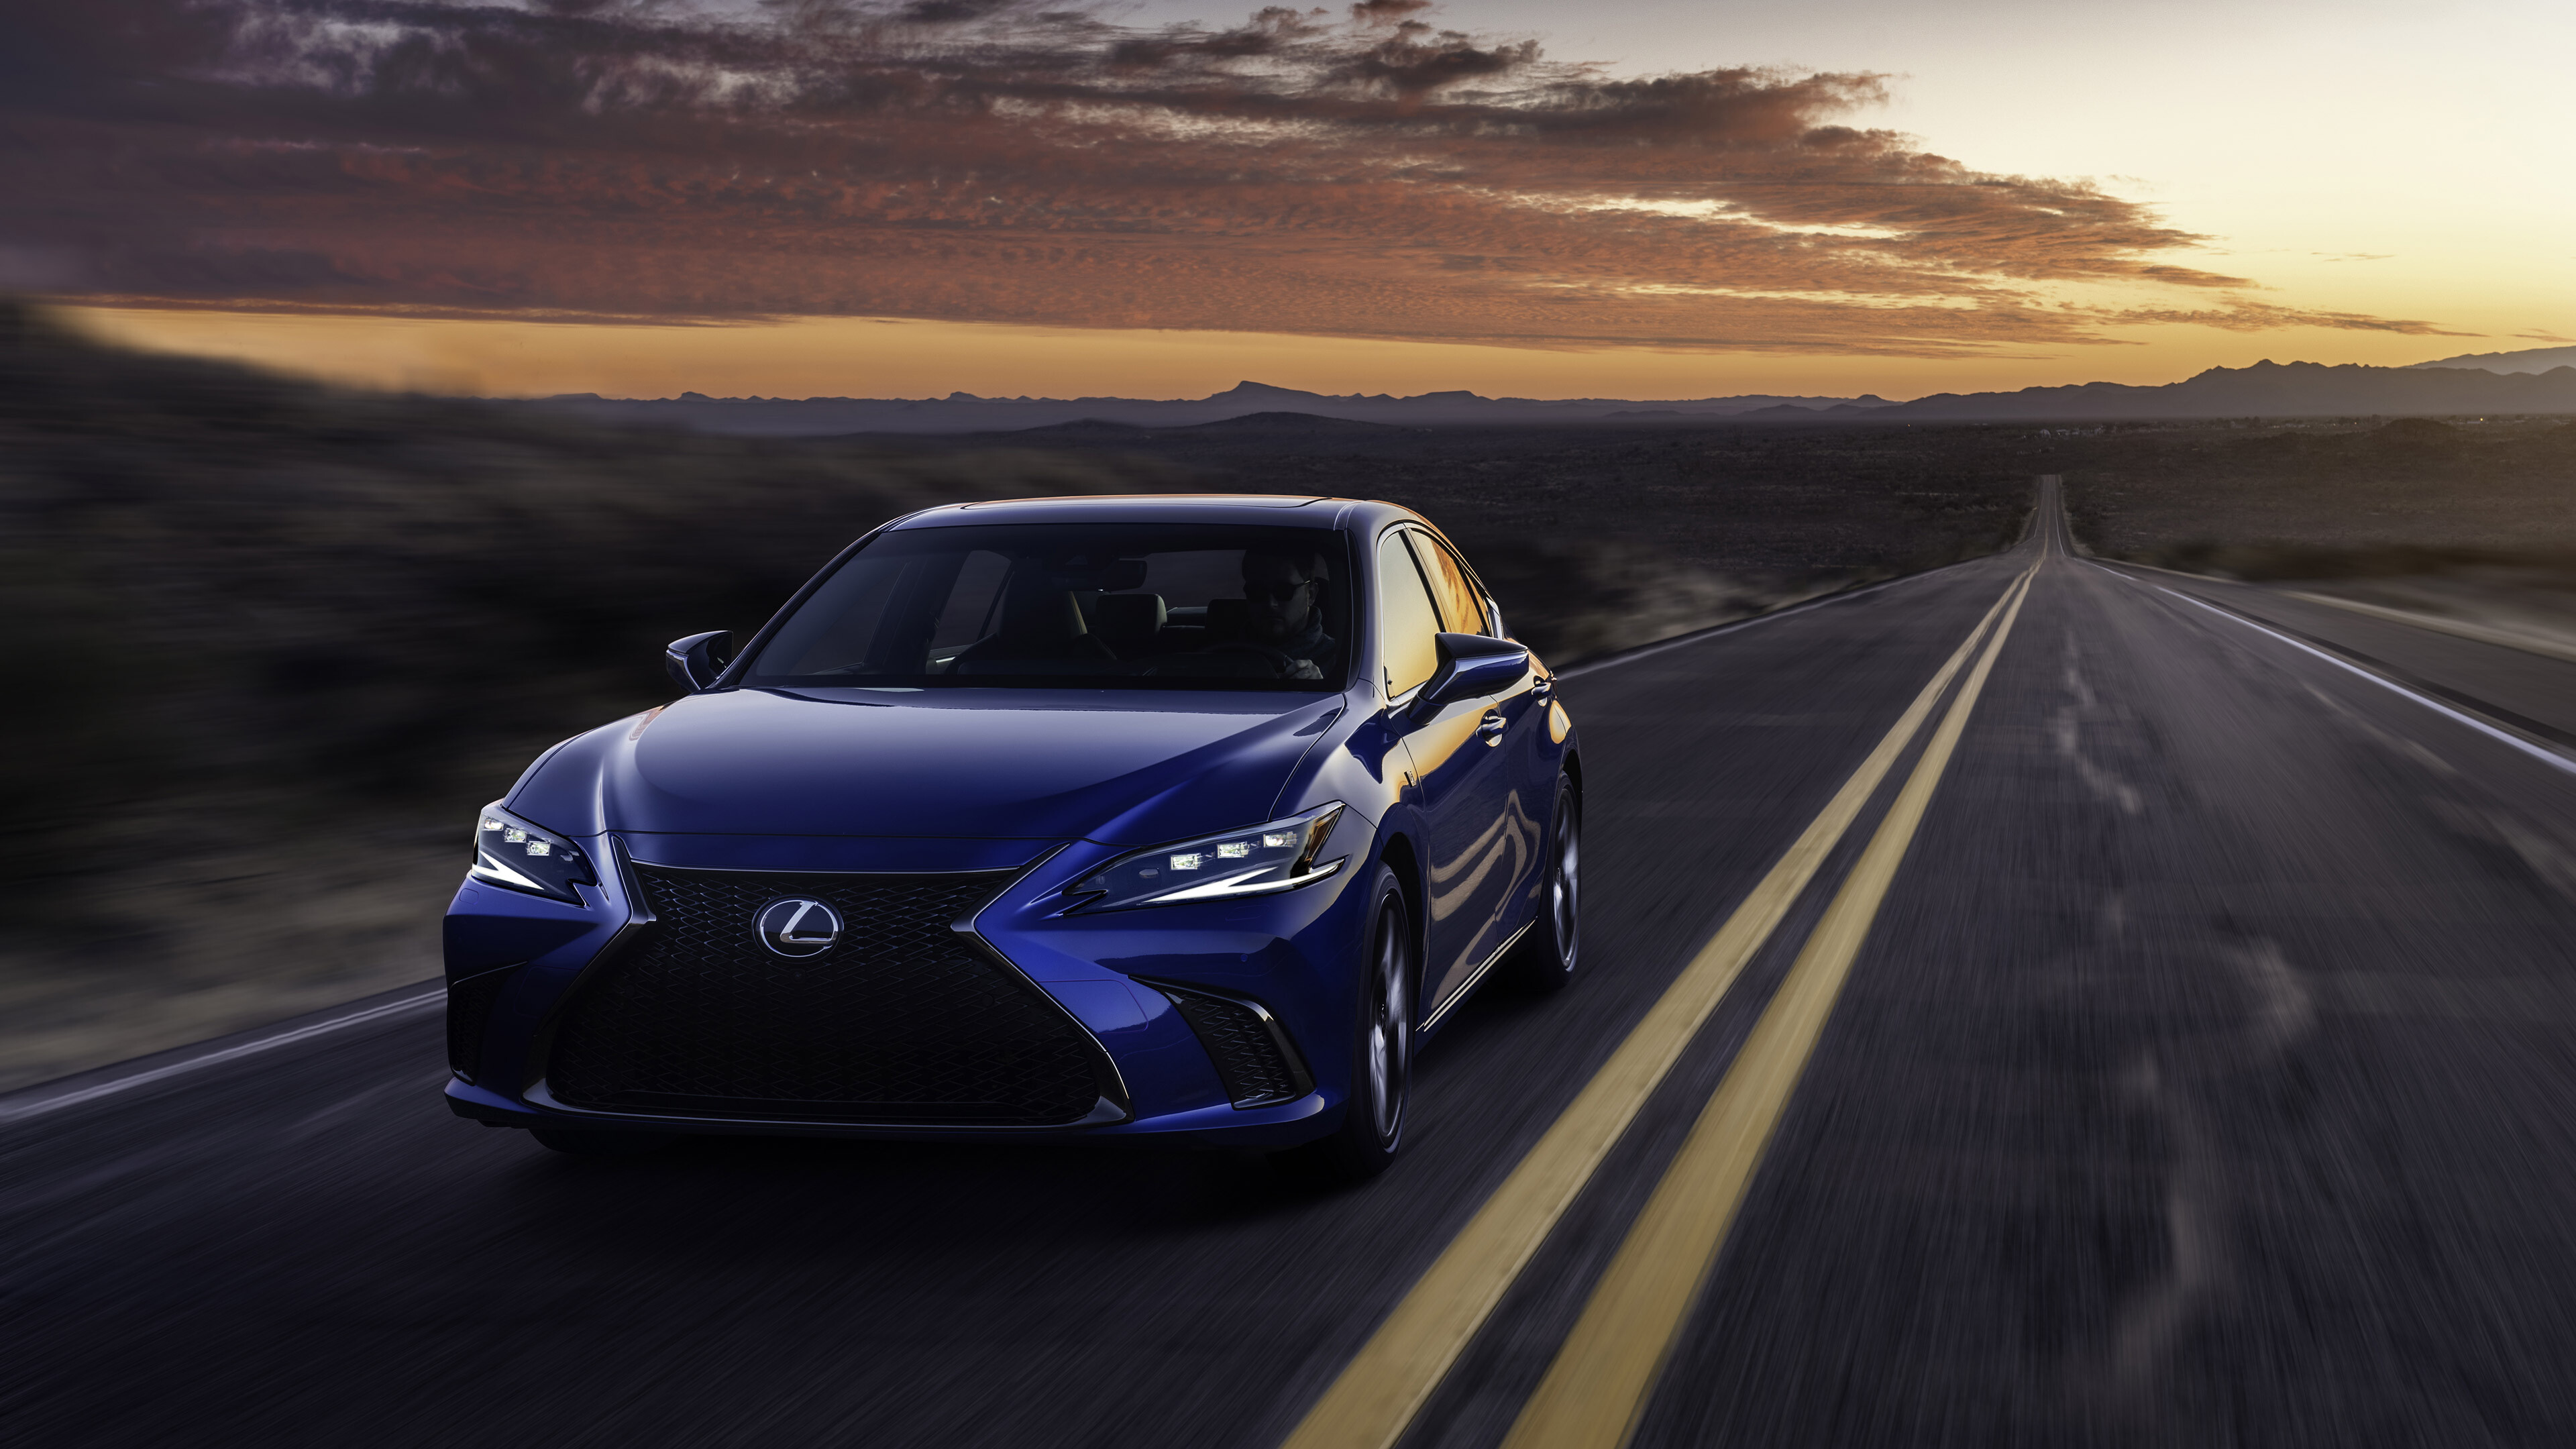 Lexus: ES,  A series of mid-size executive cars marketed since 1989. 3840x2160 4K Wallpaper.